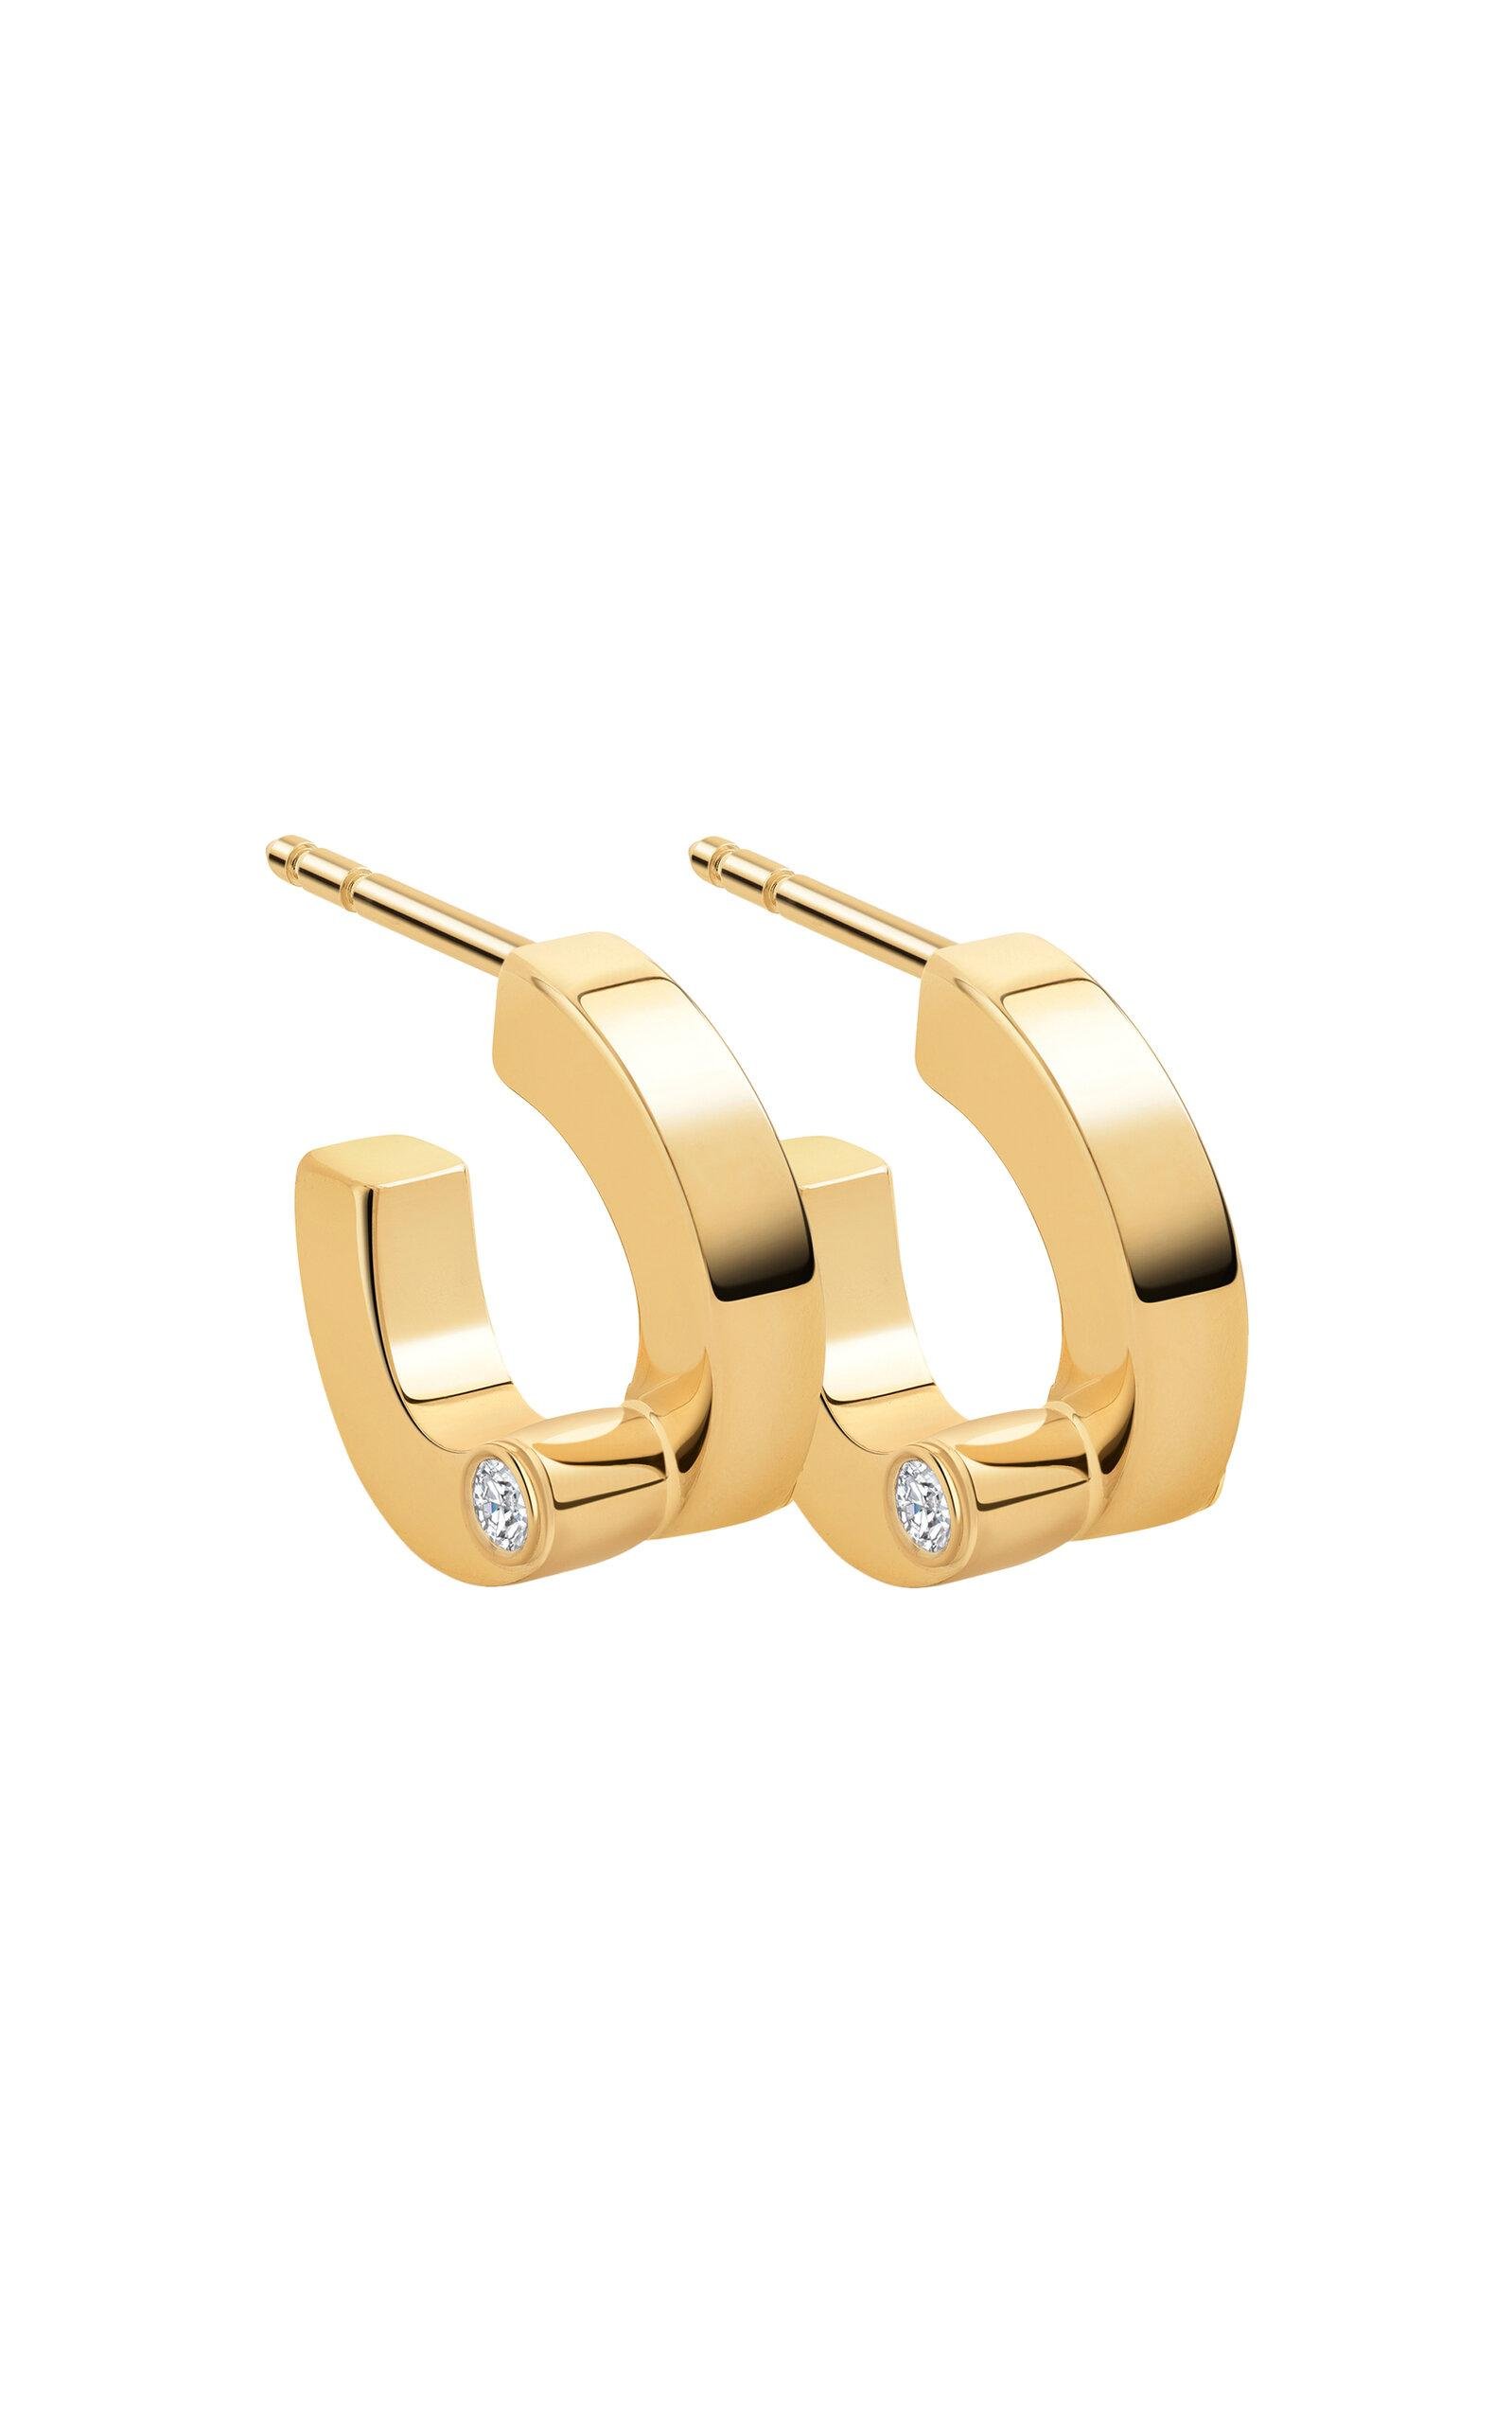 Erede - 18k Yellow Gold Coil Hoop Earrings - Gold - OS - Only At Moda Operandi - Gifts For Her by EREDE